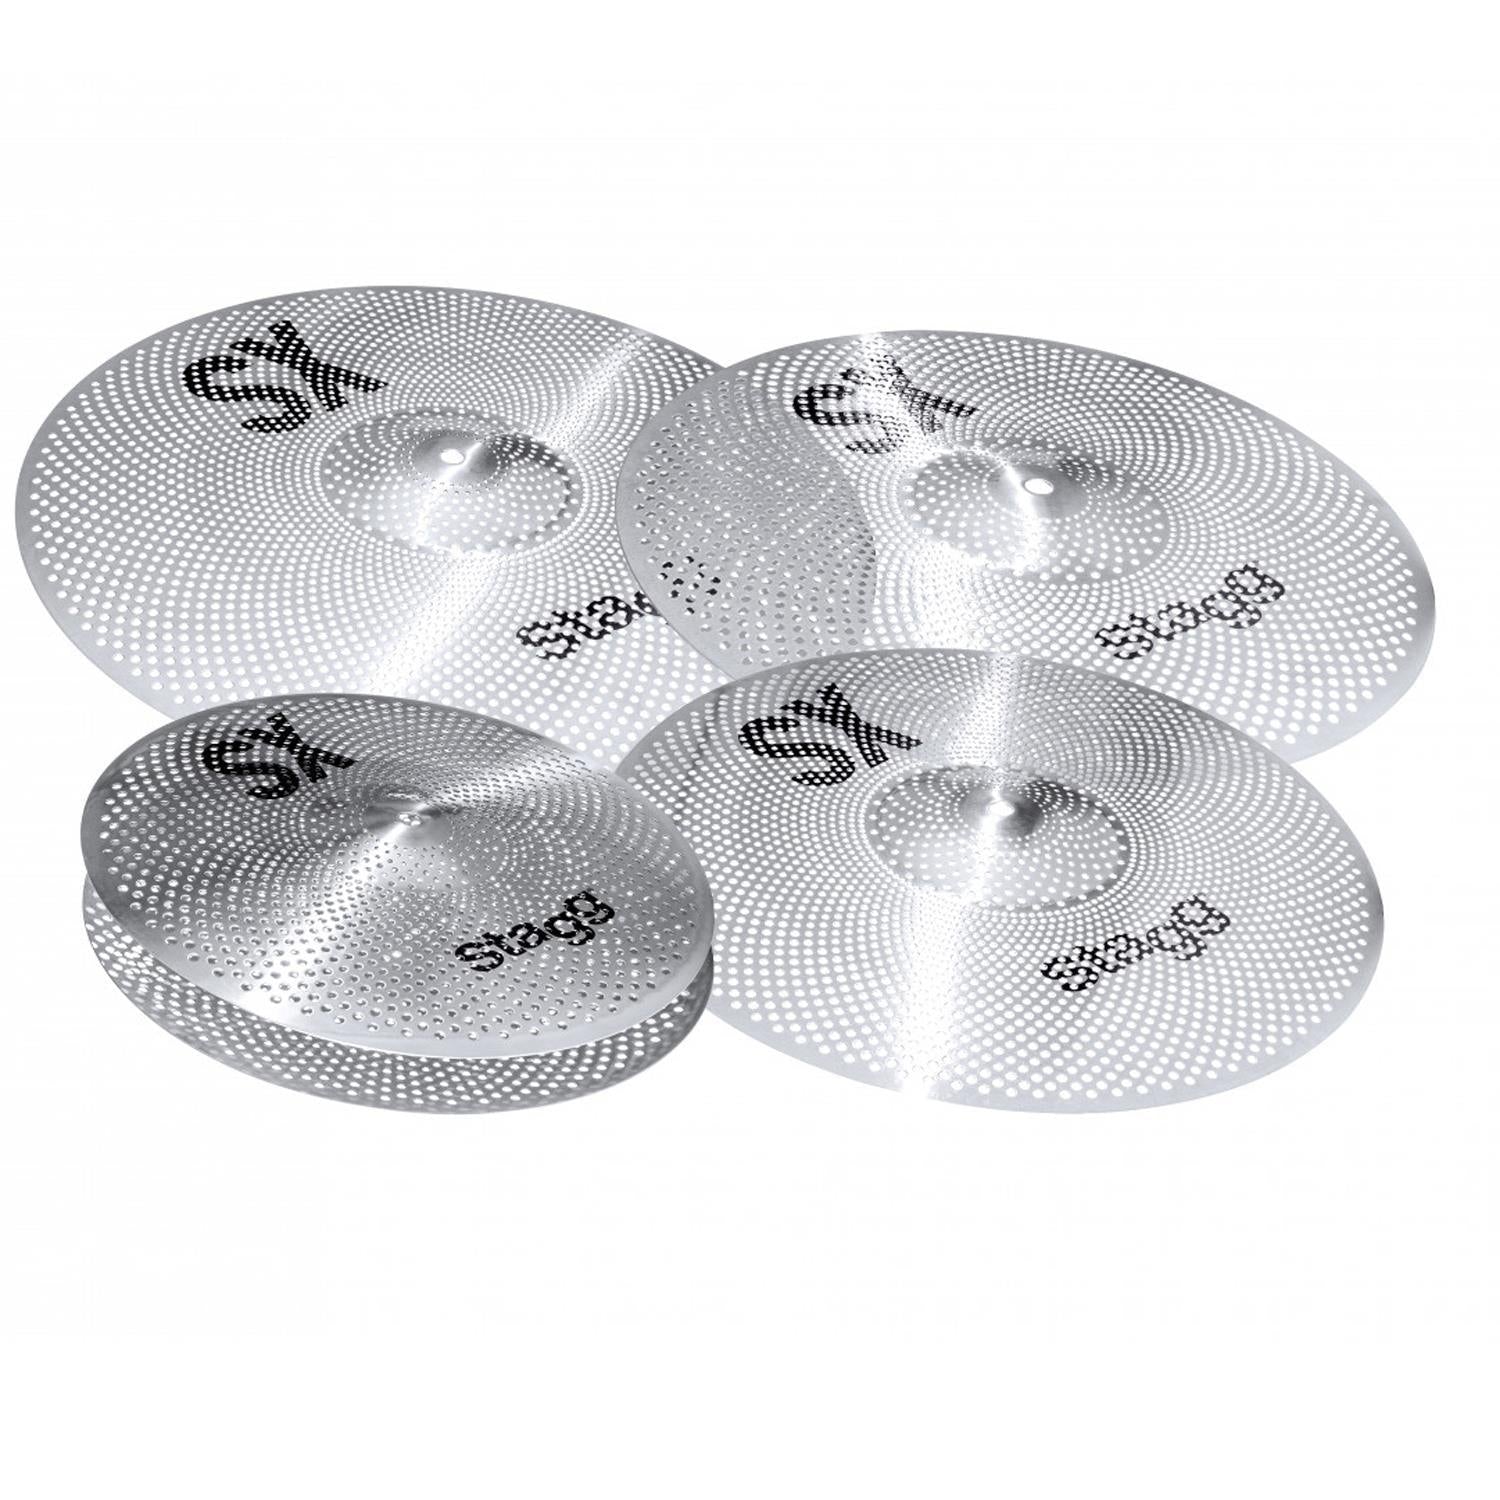 Stagg SXM Low Volume Cymbal Set 14/16/18/20" - DY Pro Audio